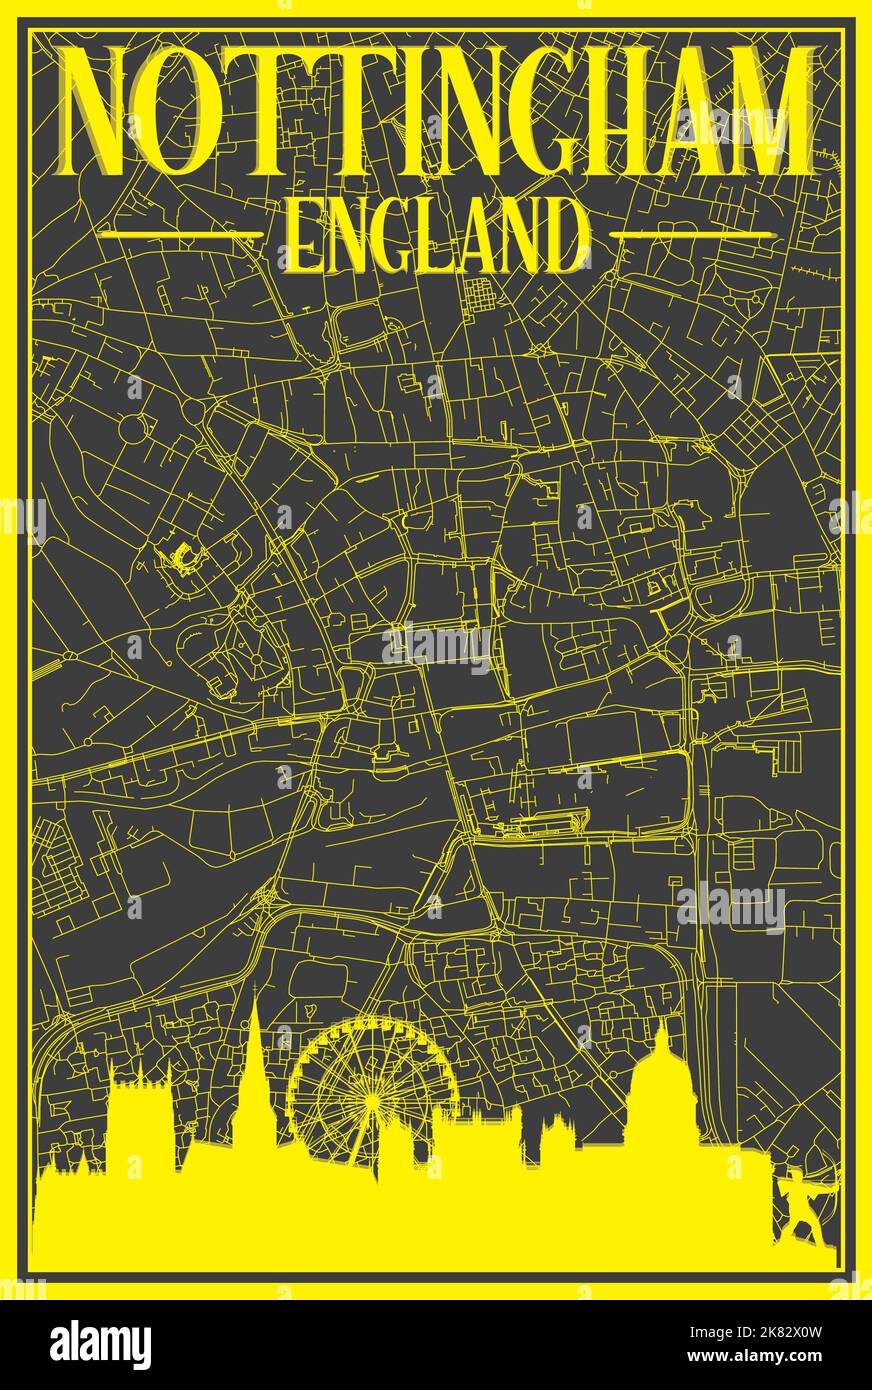 Black and yellow vintage hand-drawn printout streets network map of the downtown NOTTINGHAM, ENGLAND with brown 3D city skyline and lettering Stock Vector